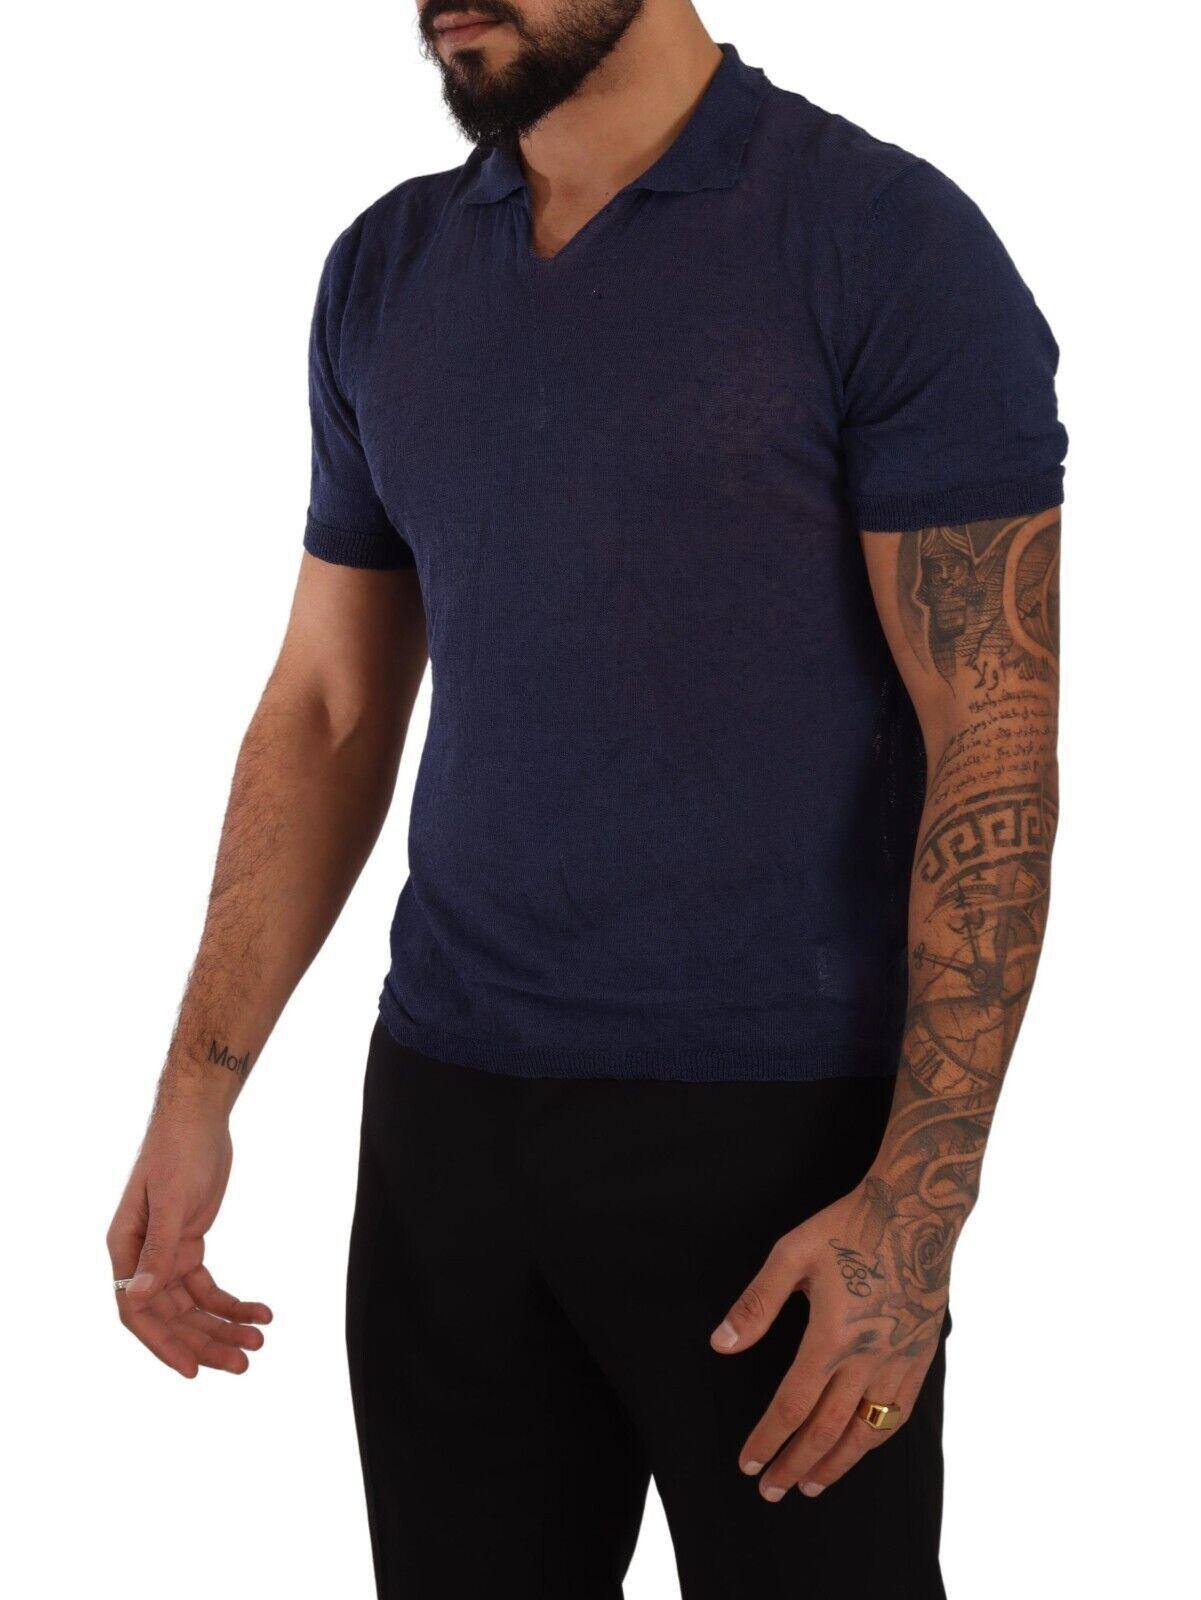 Daniele Alessandrini Men's Navy Blue Linen Collared T-shirt - Designed by Daniele Alessandrini Available to Buy at a Discounted Price on Moon Behind The Hill Online Designer Discount Store